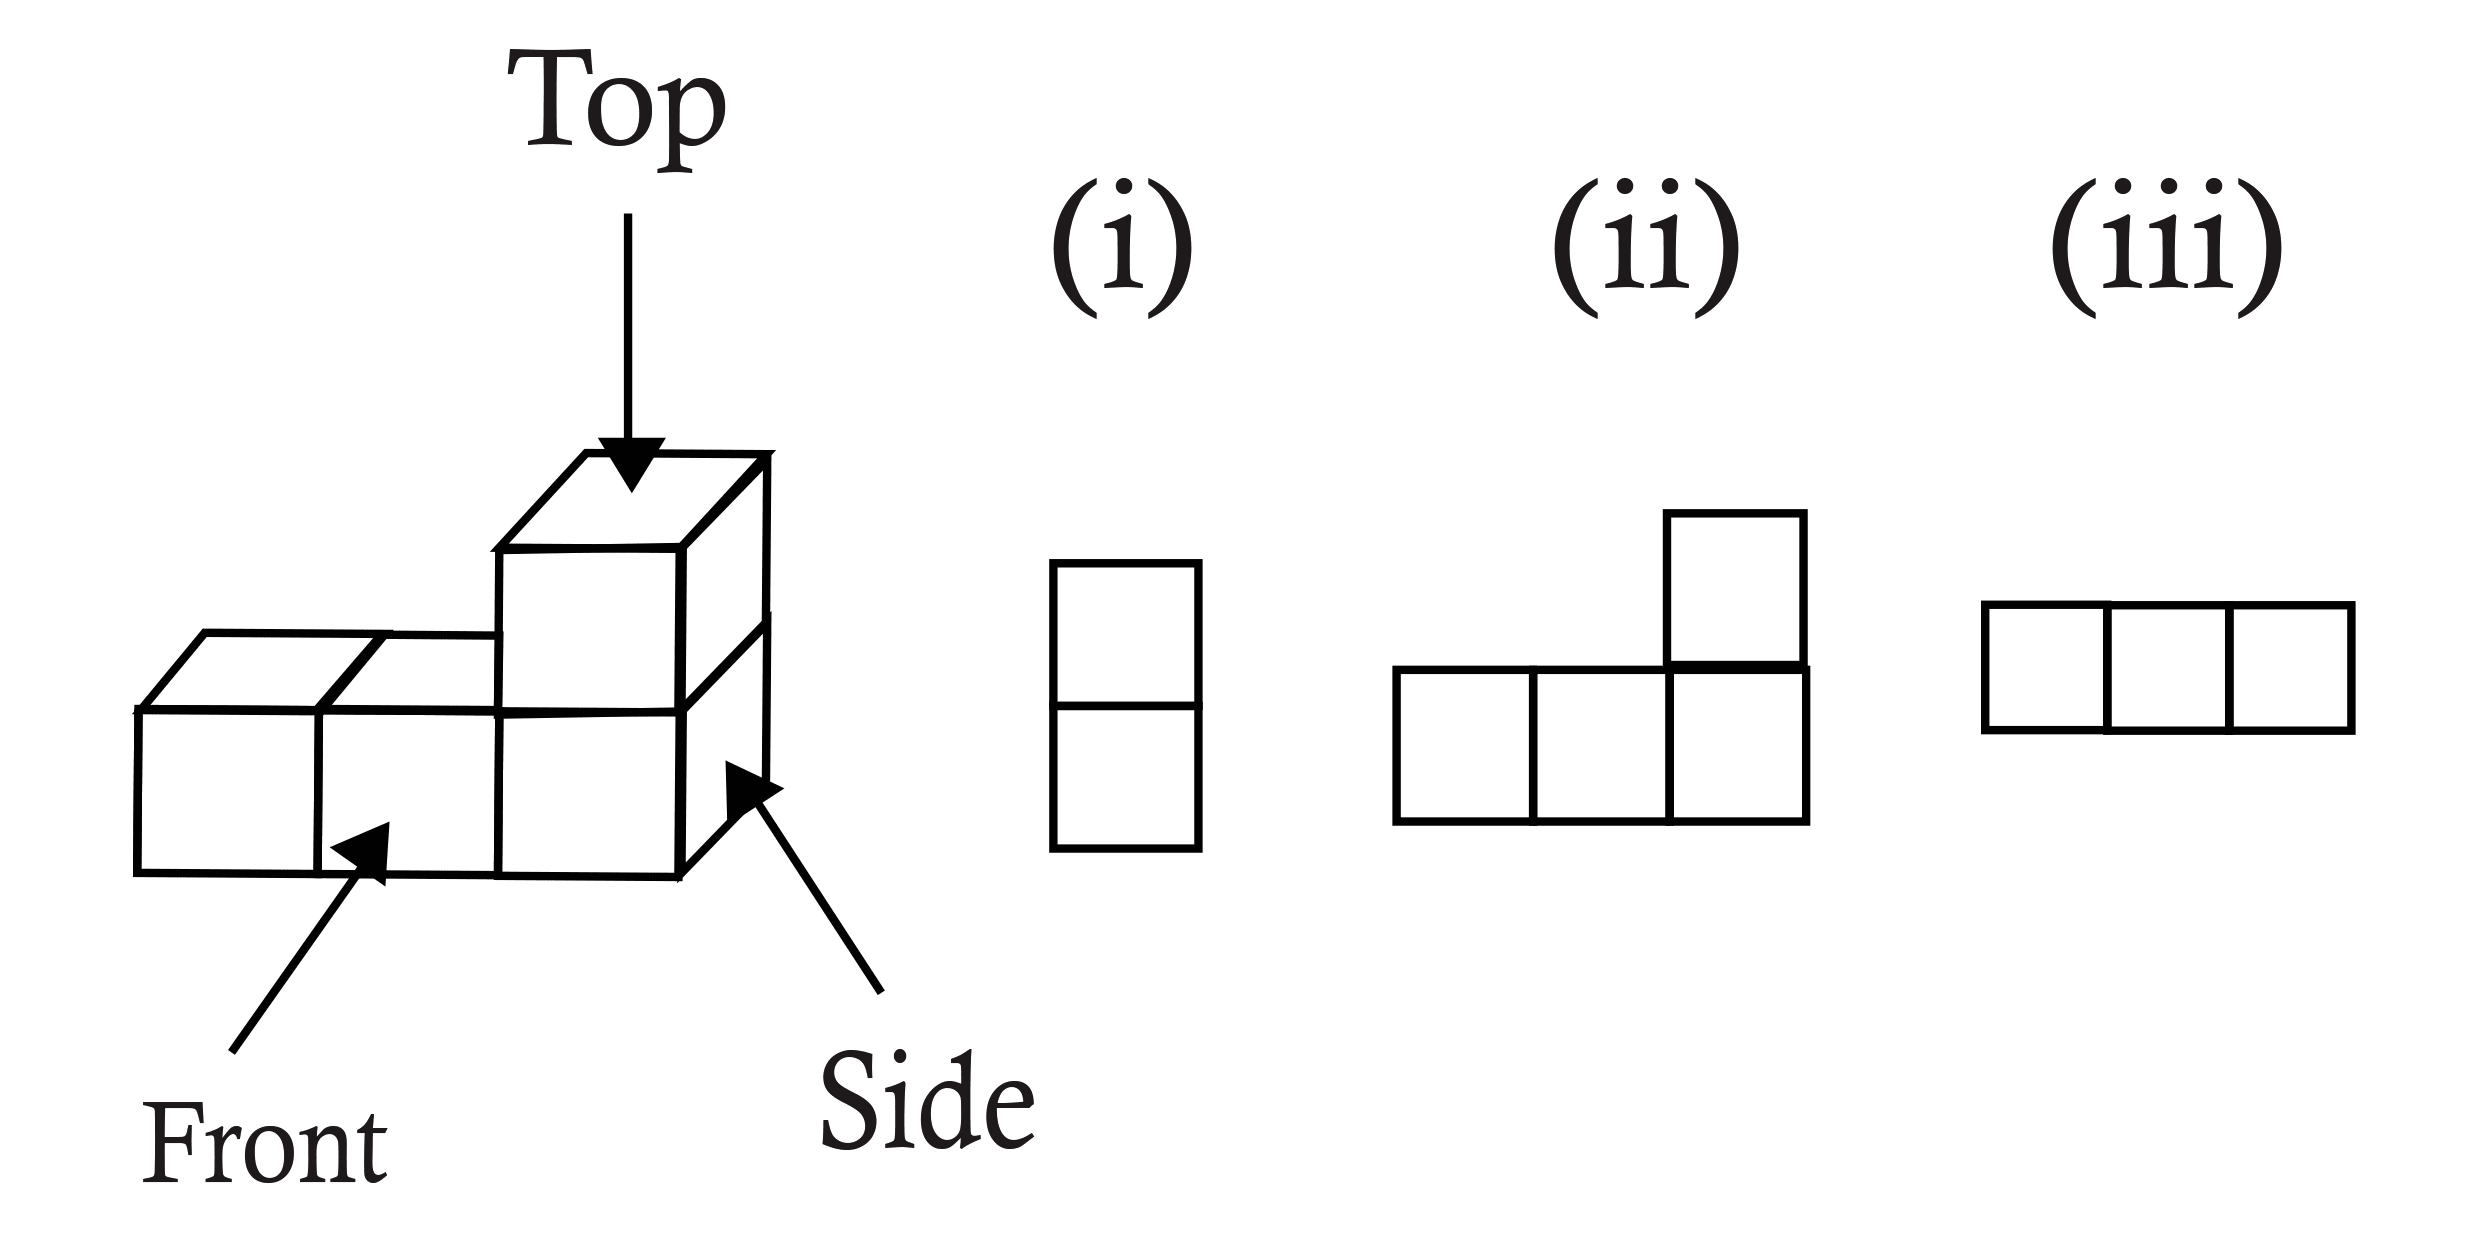 Shape of a solid having 4 cubes